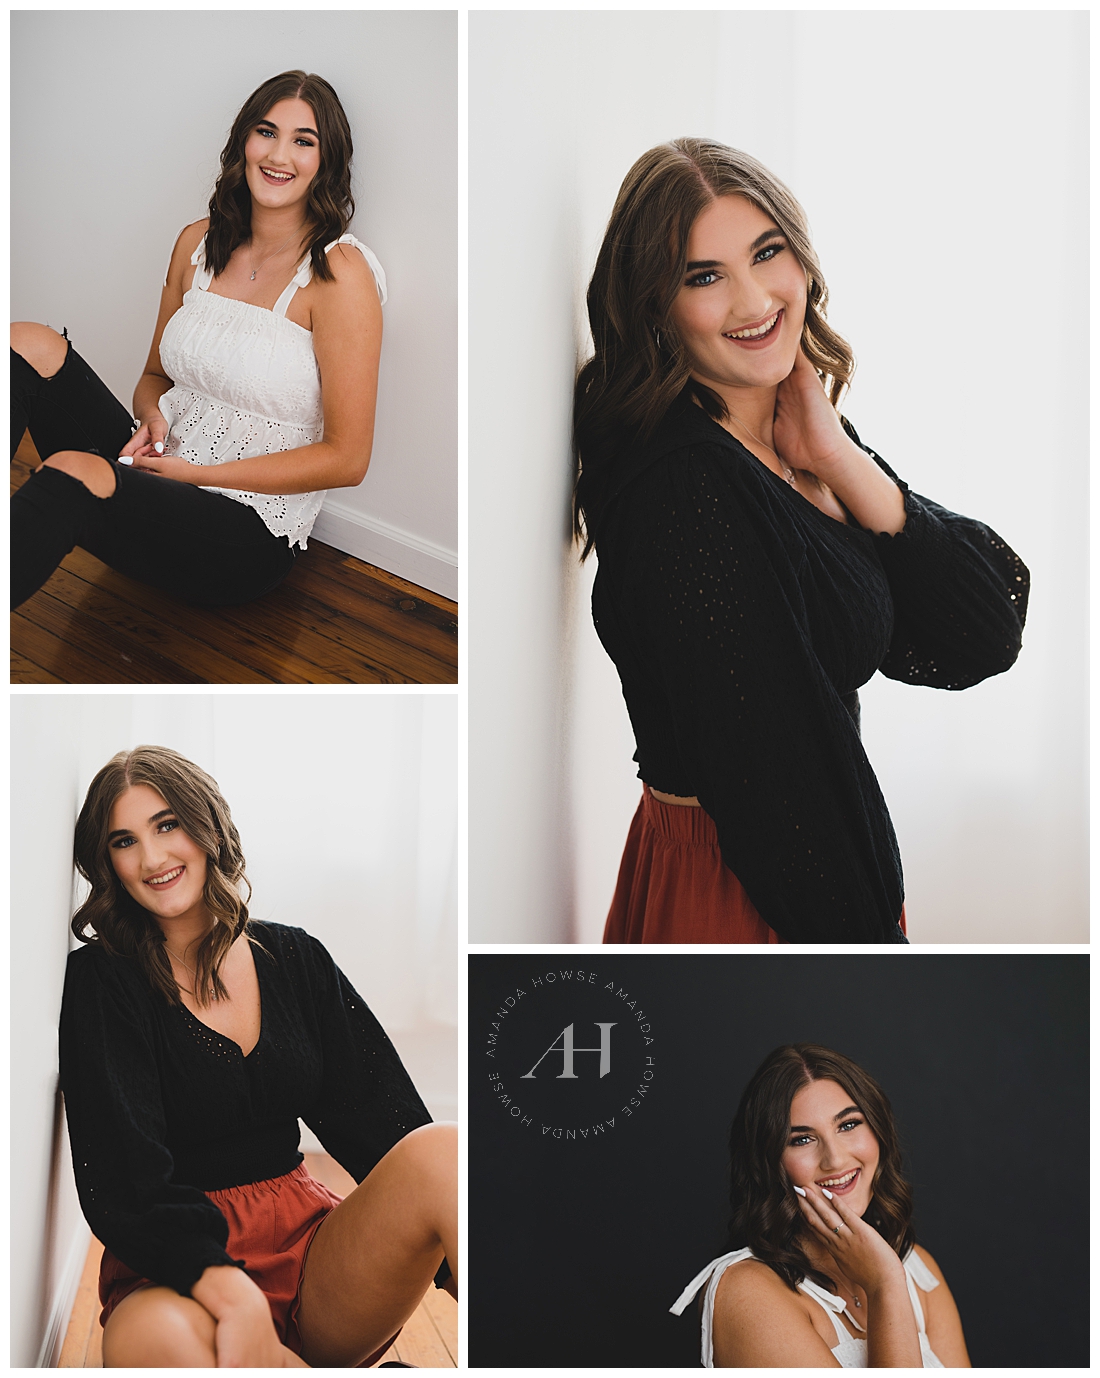 Studio 253 Senior Portraits with Simple Backgrounds | What to Wear for Indoor Senior Portraits | Photographed by the Best Tacoma Senior Photographer Amanda Howse Photography